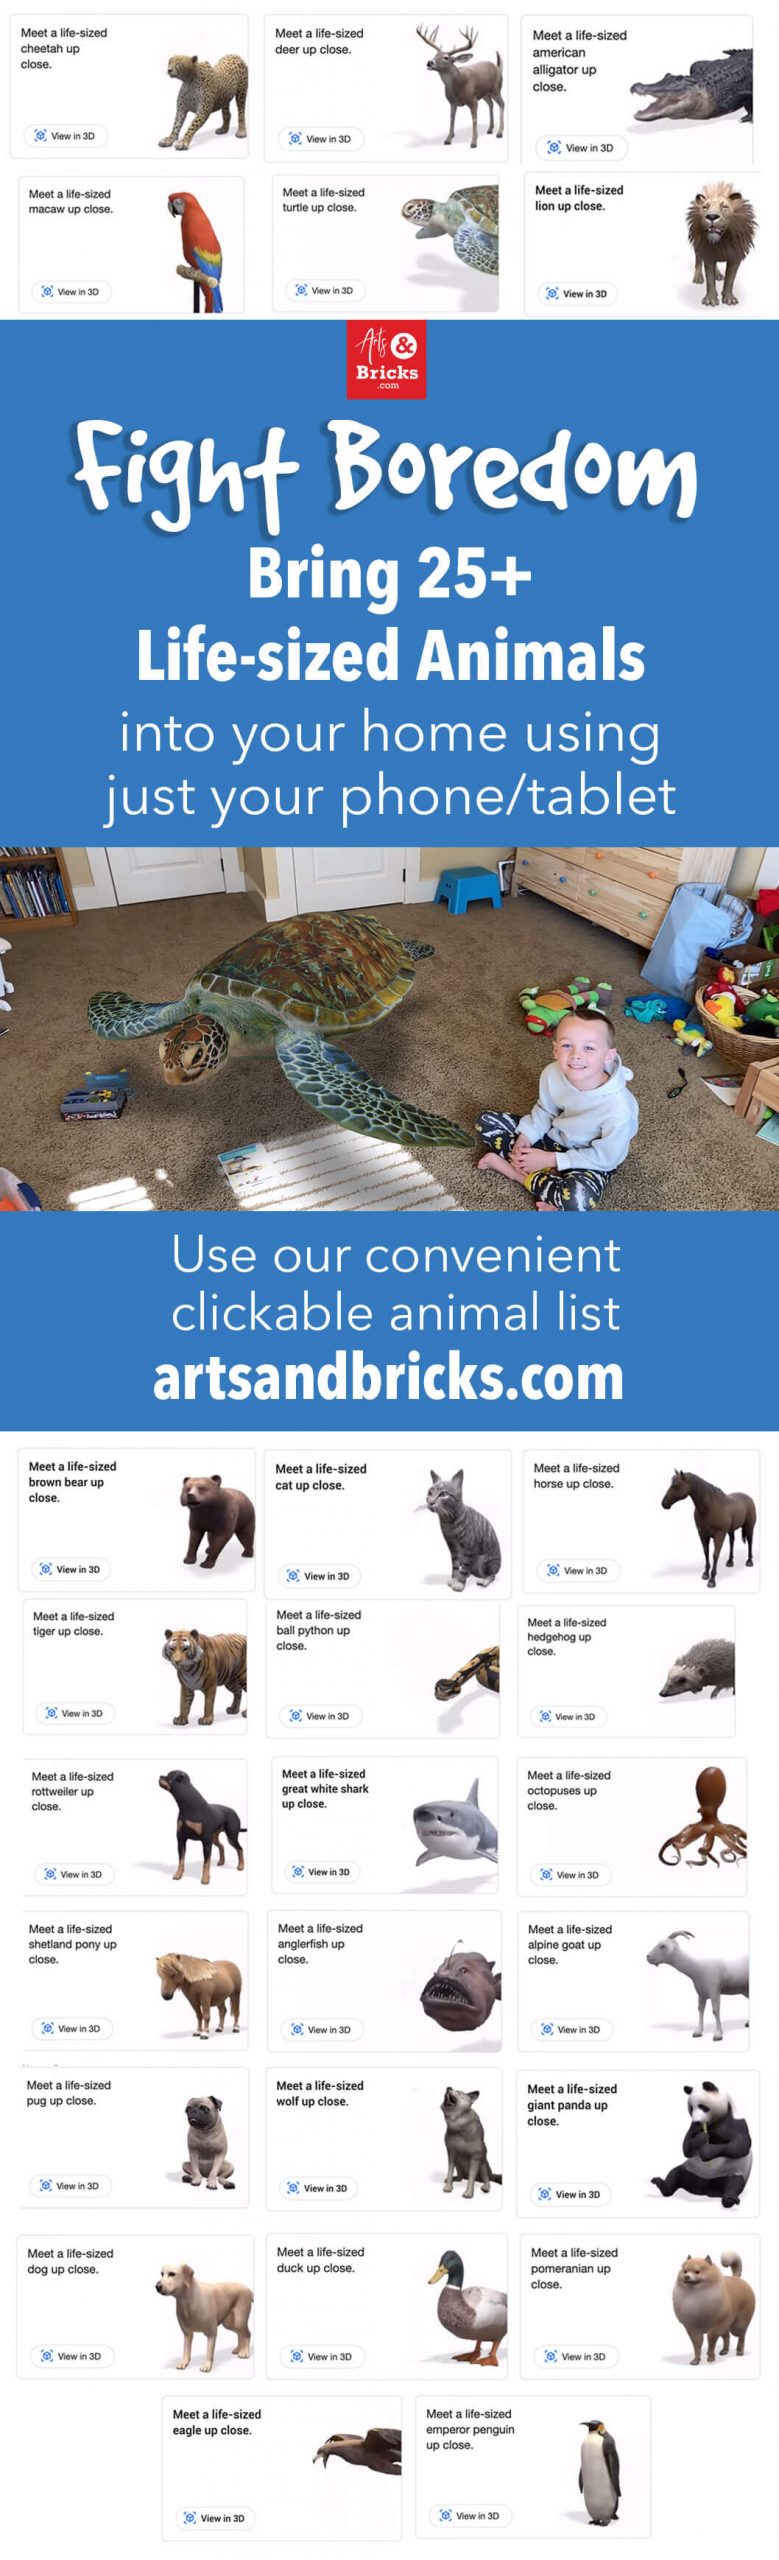 Fight Boredom - Bring 25+ Life-sized animals into your home using just your phone or tablet. Full clickable list on artsandbricks.com